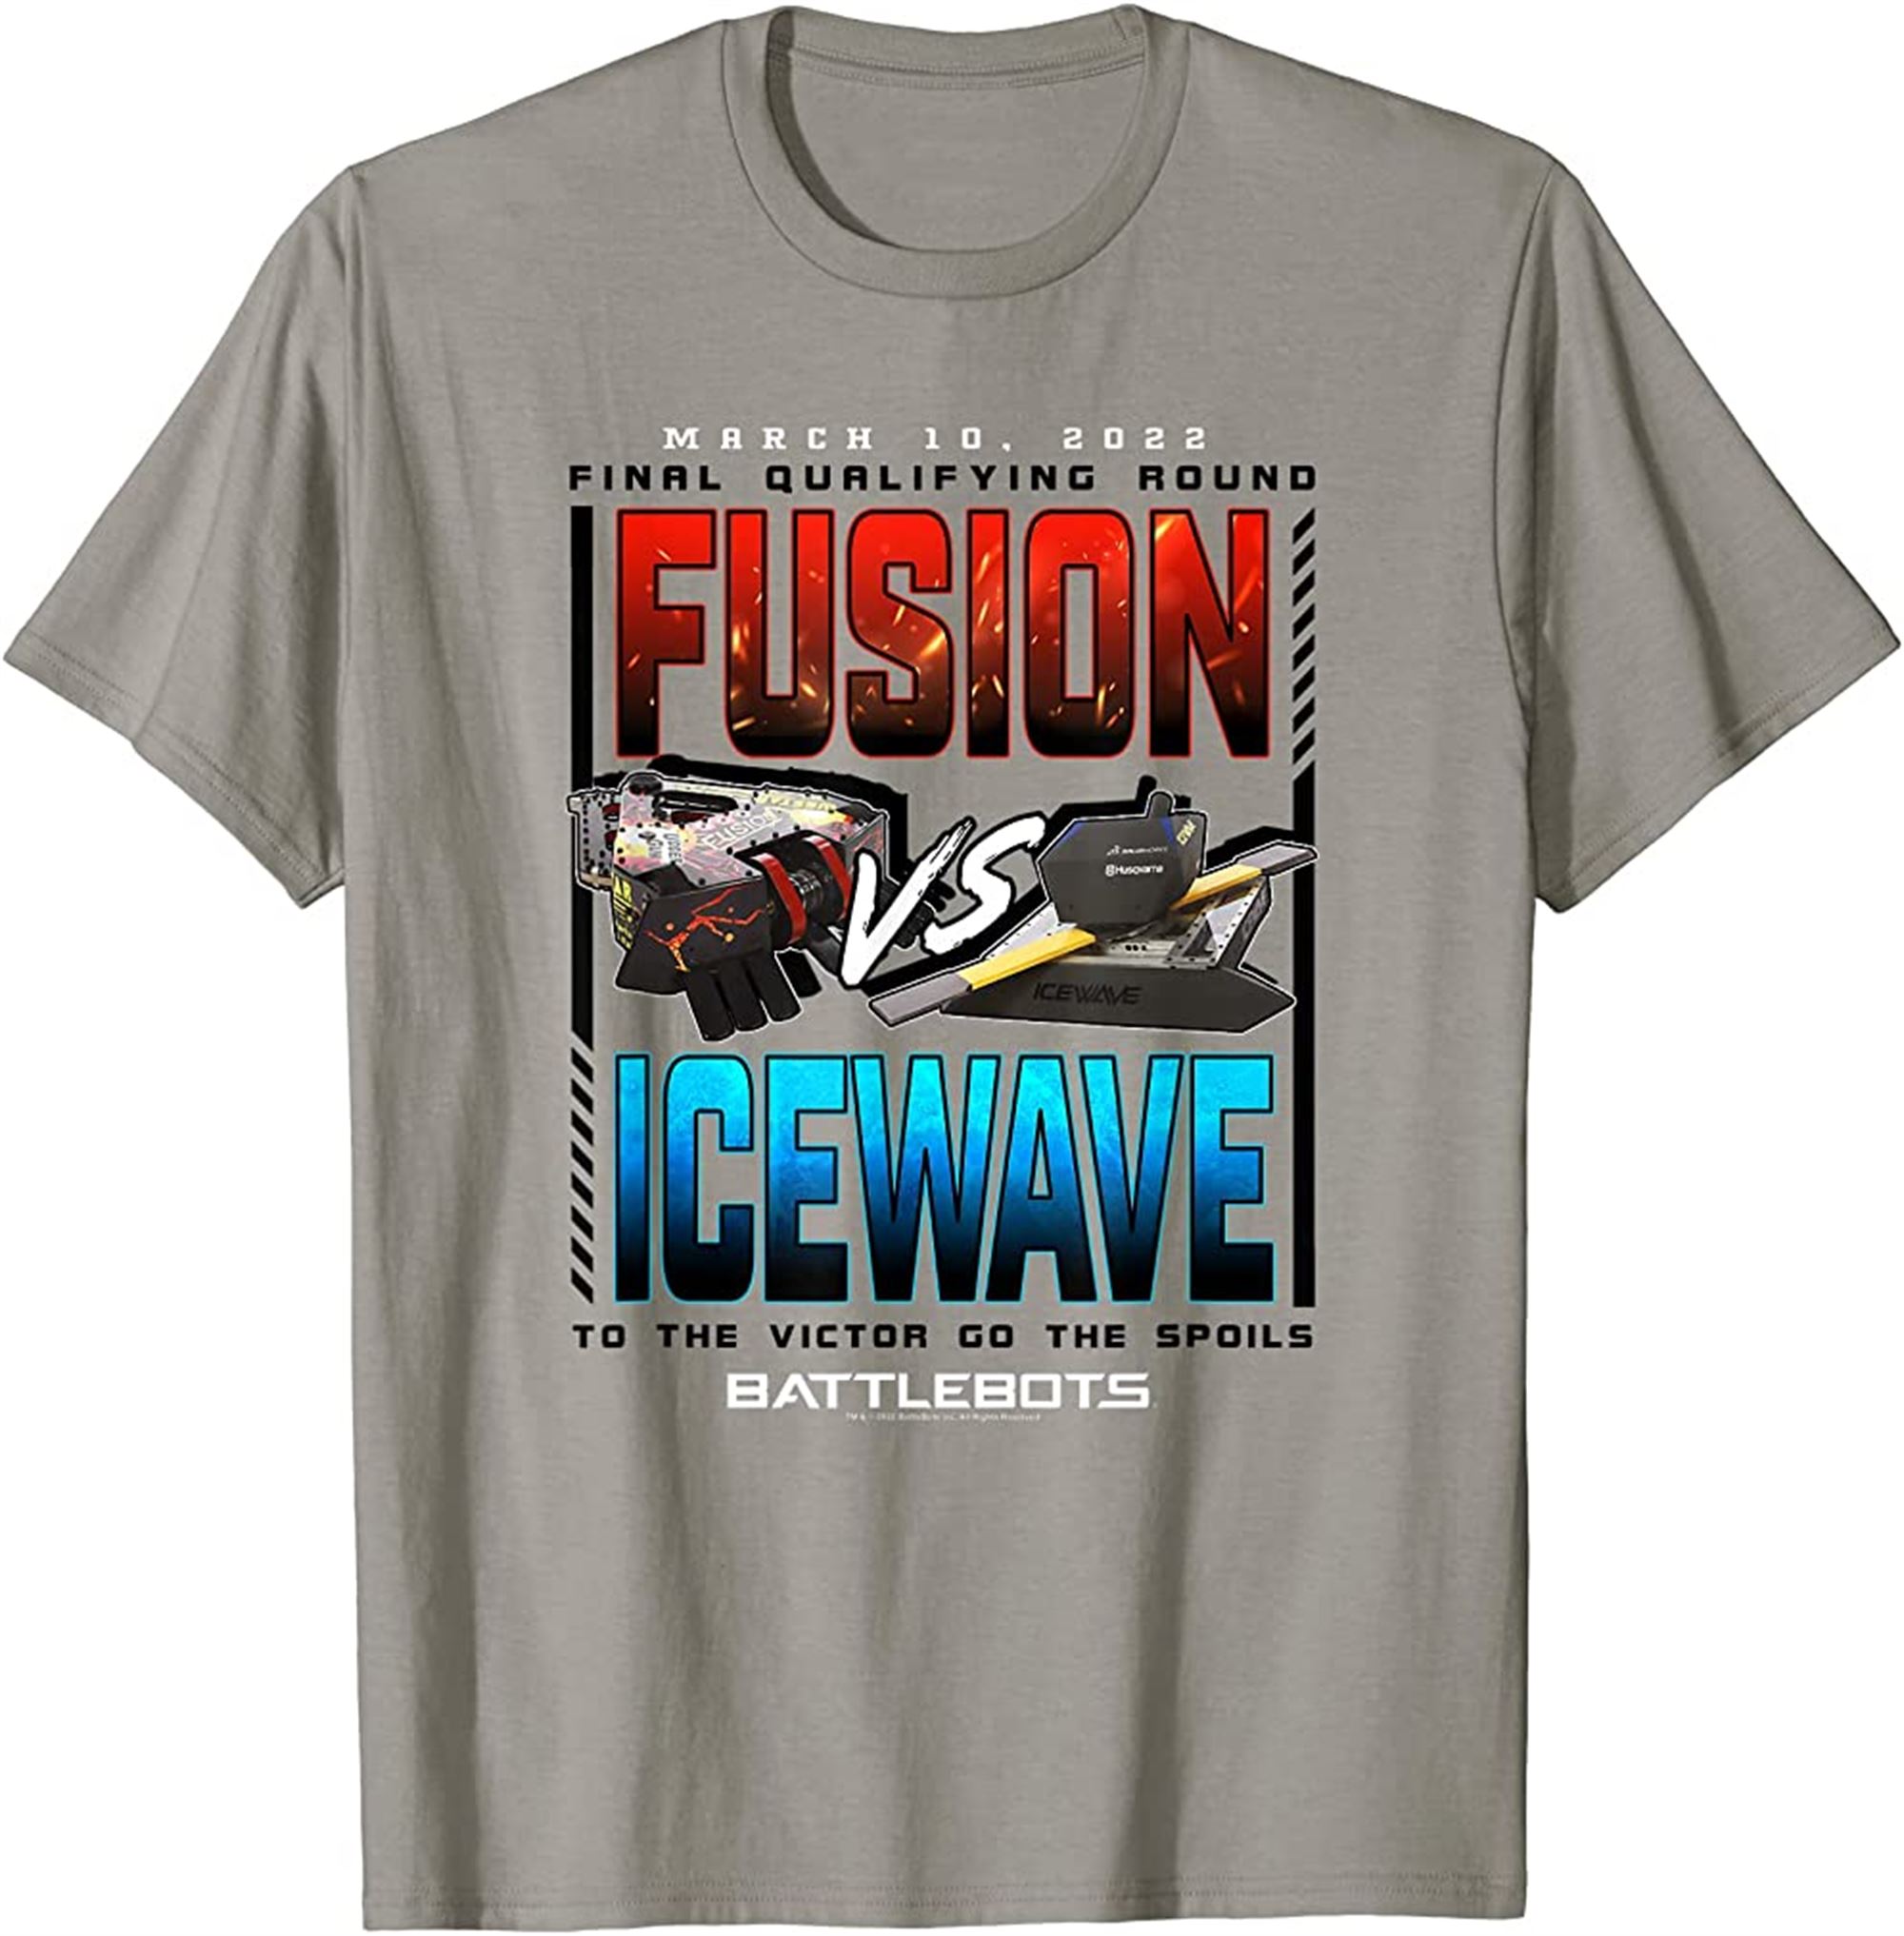 March 10th Main Event Fusion Vs Icewave T-shirt Full Size Up To 5xl